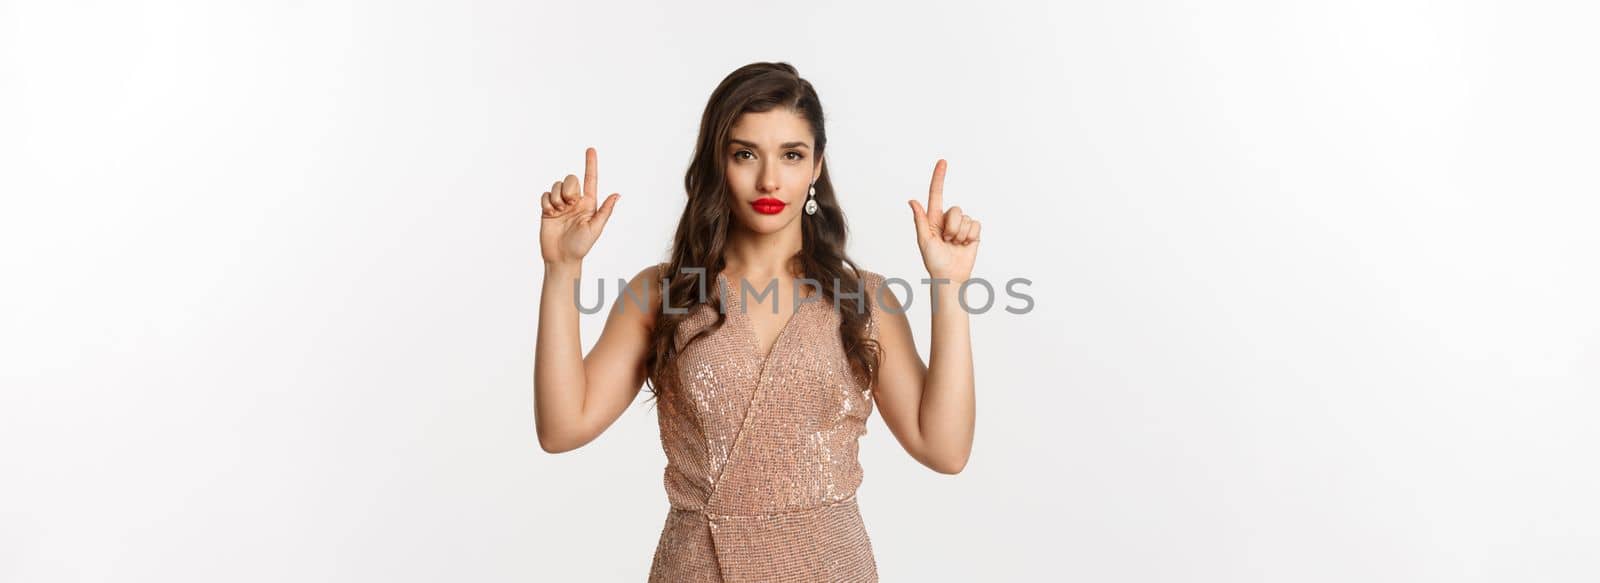 New Year, christmas and celebration concept. Elegant young woman with red lipstick, wearing party dress and looking sassy, pointing fingers up at logo, white background by Benzoix